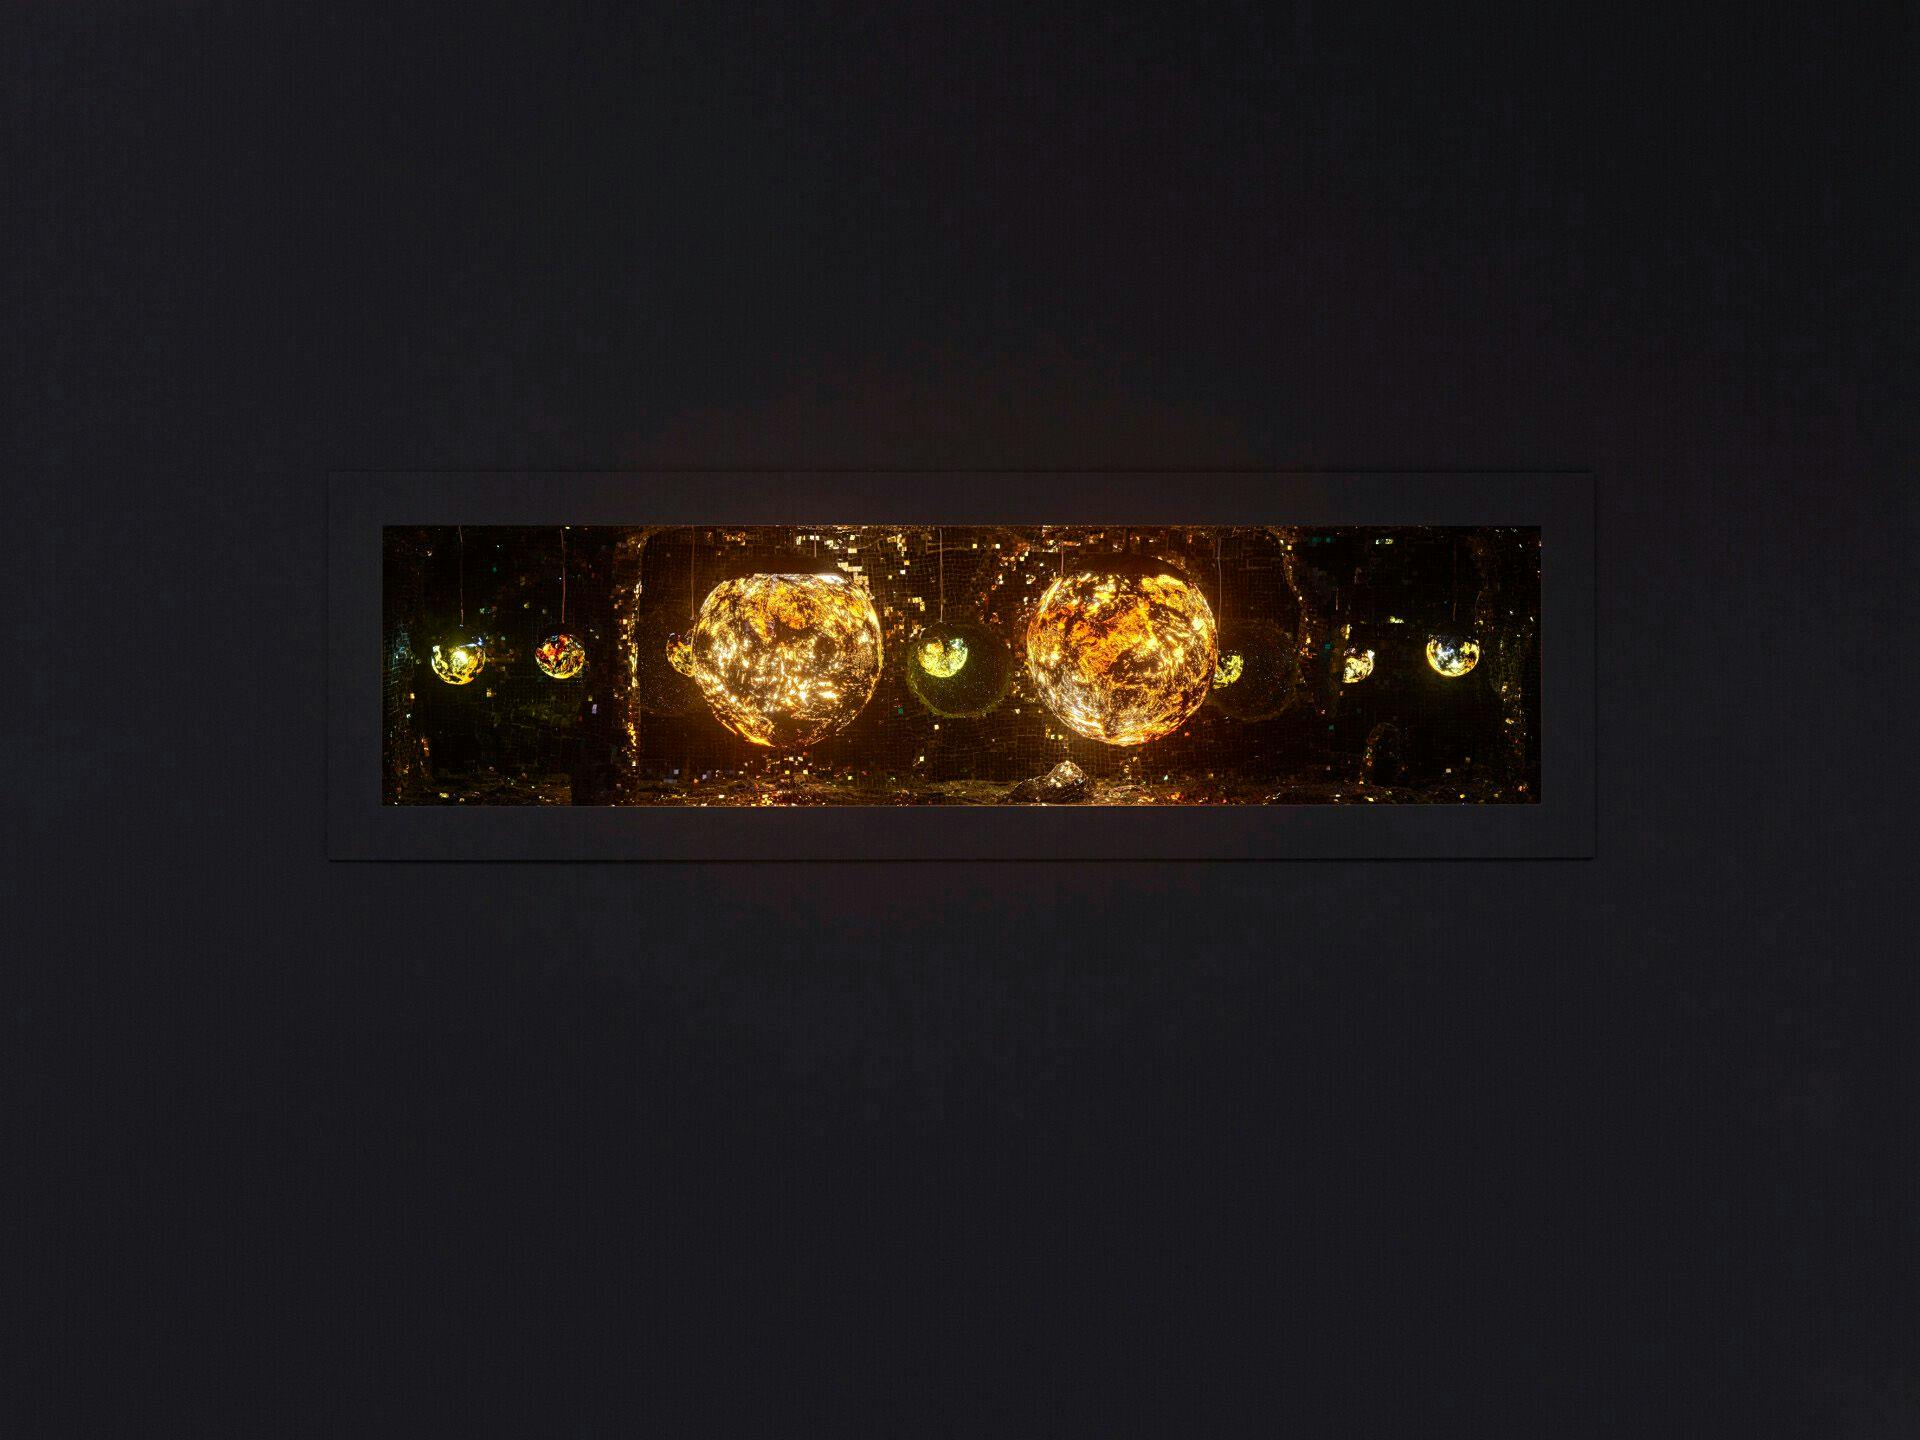 Comfort Zone (It’s Easy to Fall in Love with Fire), 2019, wood, glass mosaic tiles, glass, plastic, resin, LEDS, carving foam, plaster, plexiglas, gummi bears, 14 x 49.5 x 14 in